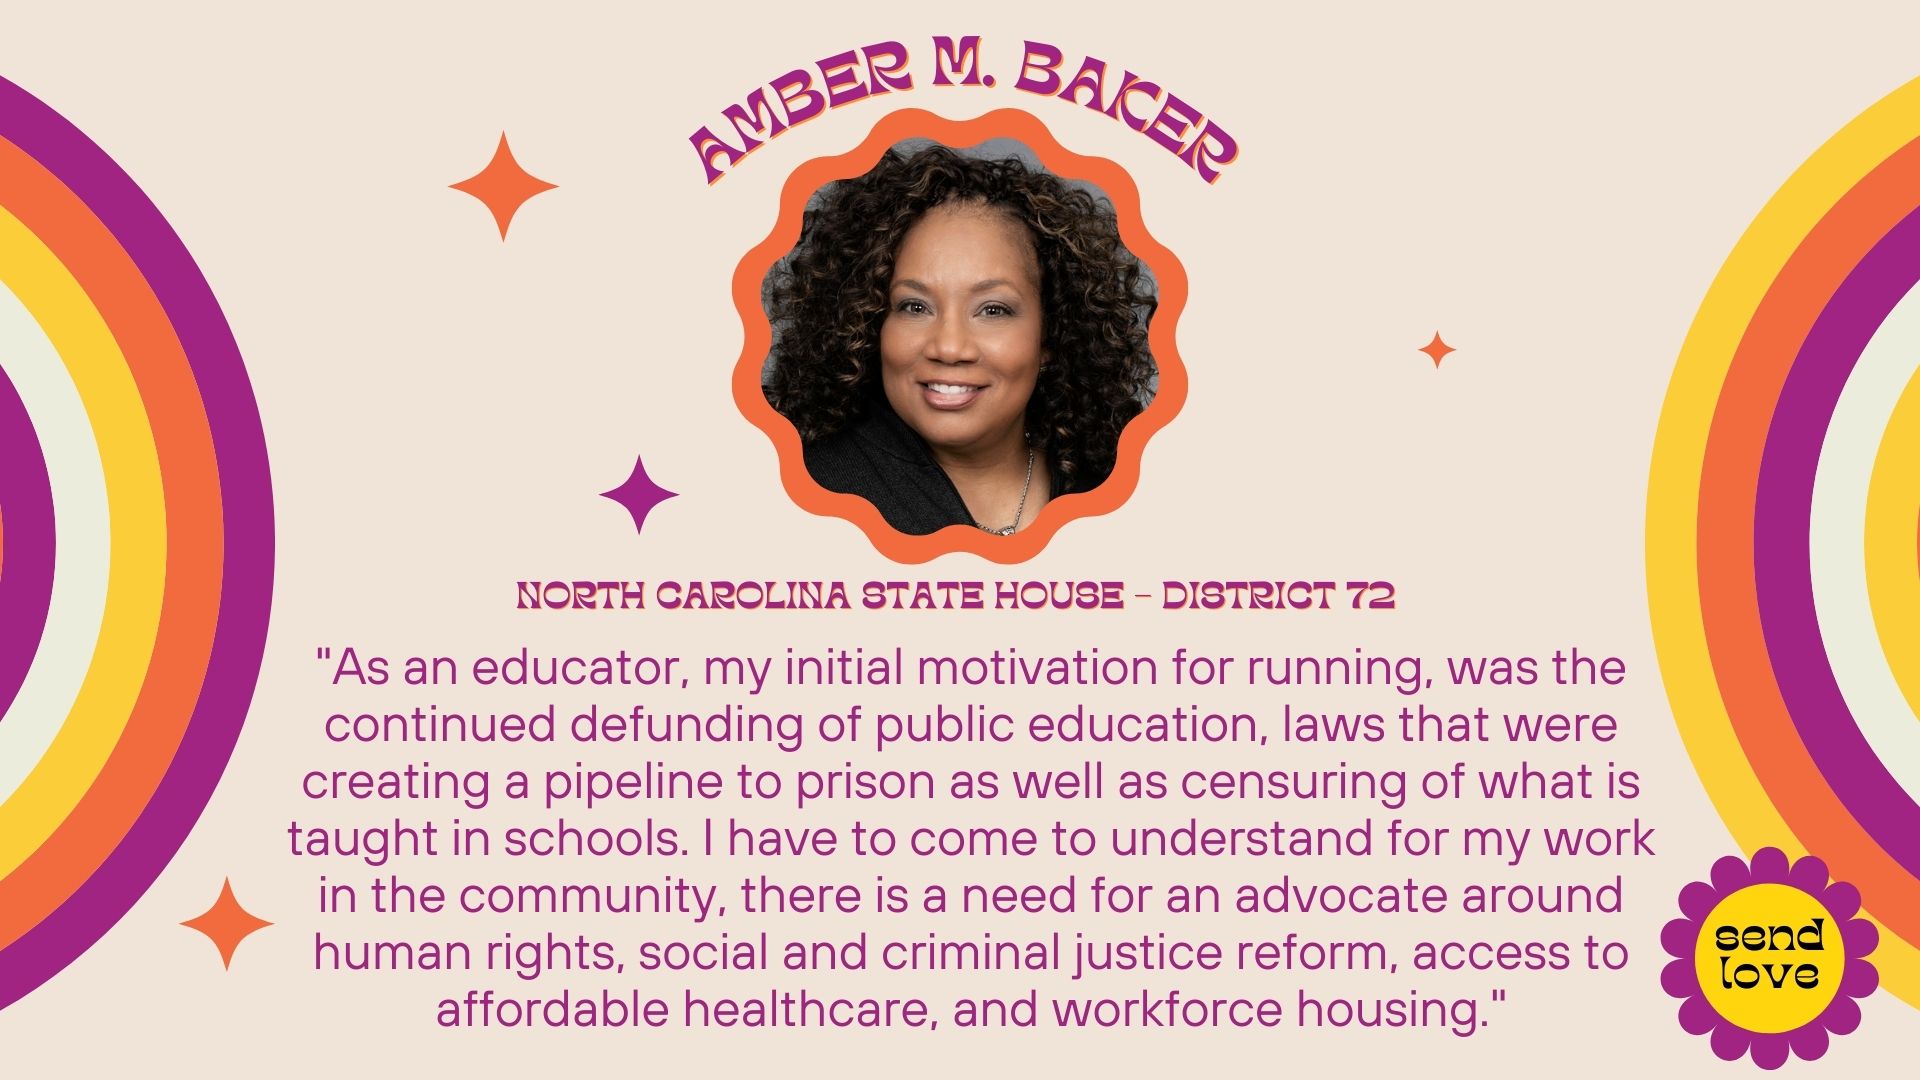 Amber M. Baker: North Carolina State House - District 72. As an educator, my initial motivation for running, was the continued defunding of public education, laws that were creating a pipeline to prison as well as censuring of what is taught in schools. I have to come to understand for my work in the community, there is a need for an advocate around human rights, social and criminal justice reform, access to affordable healthcare and workforce housing.